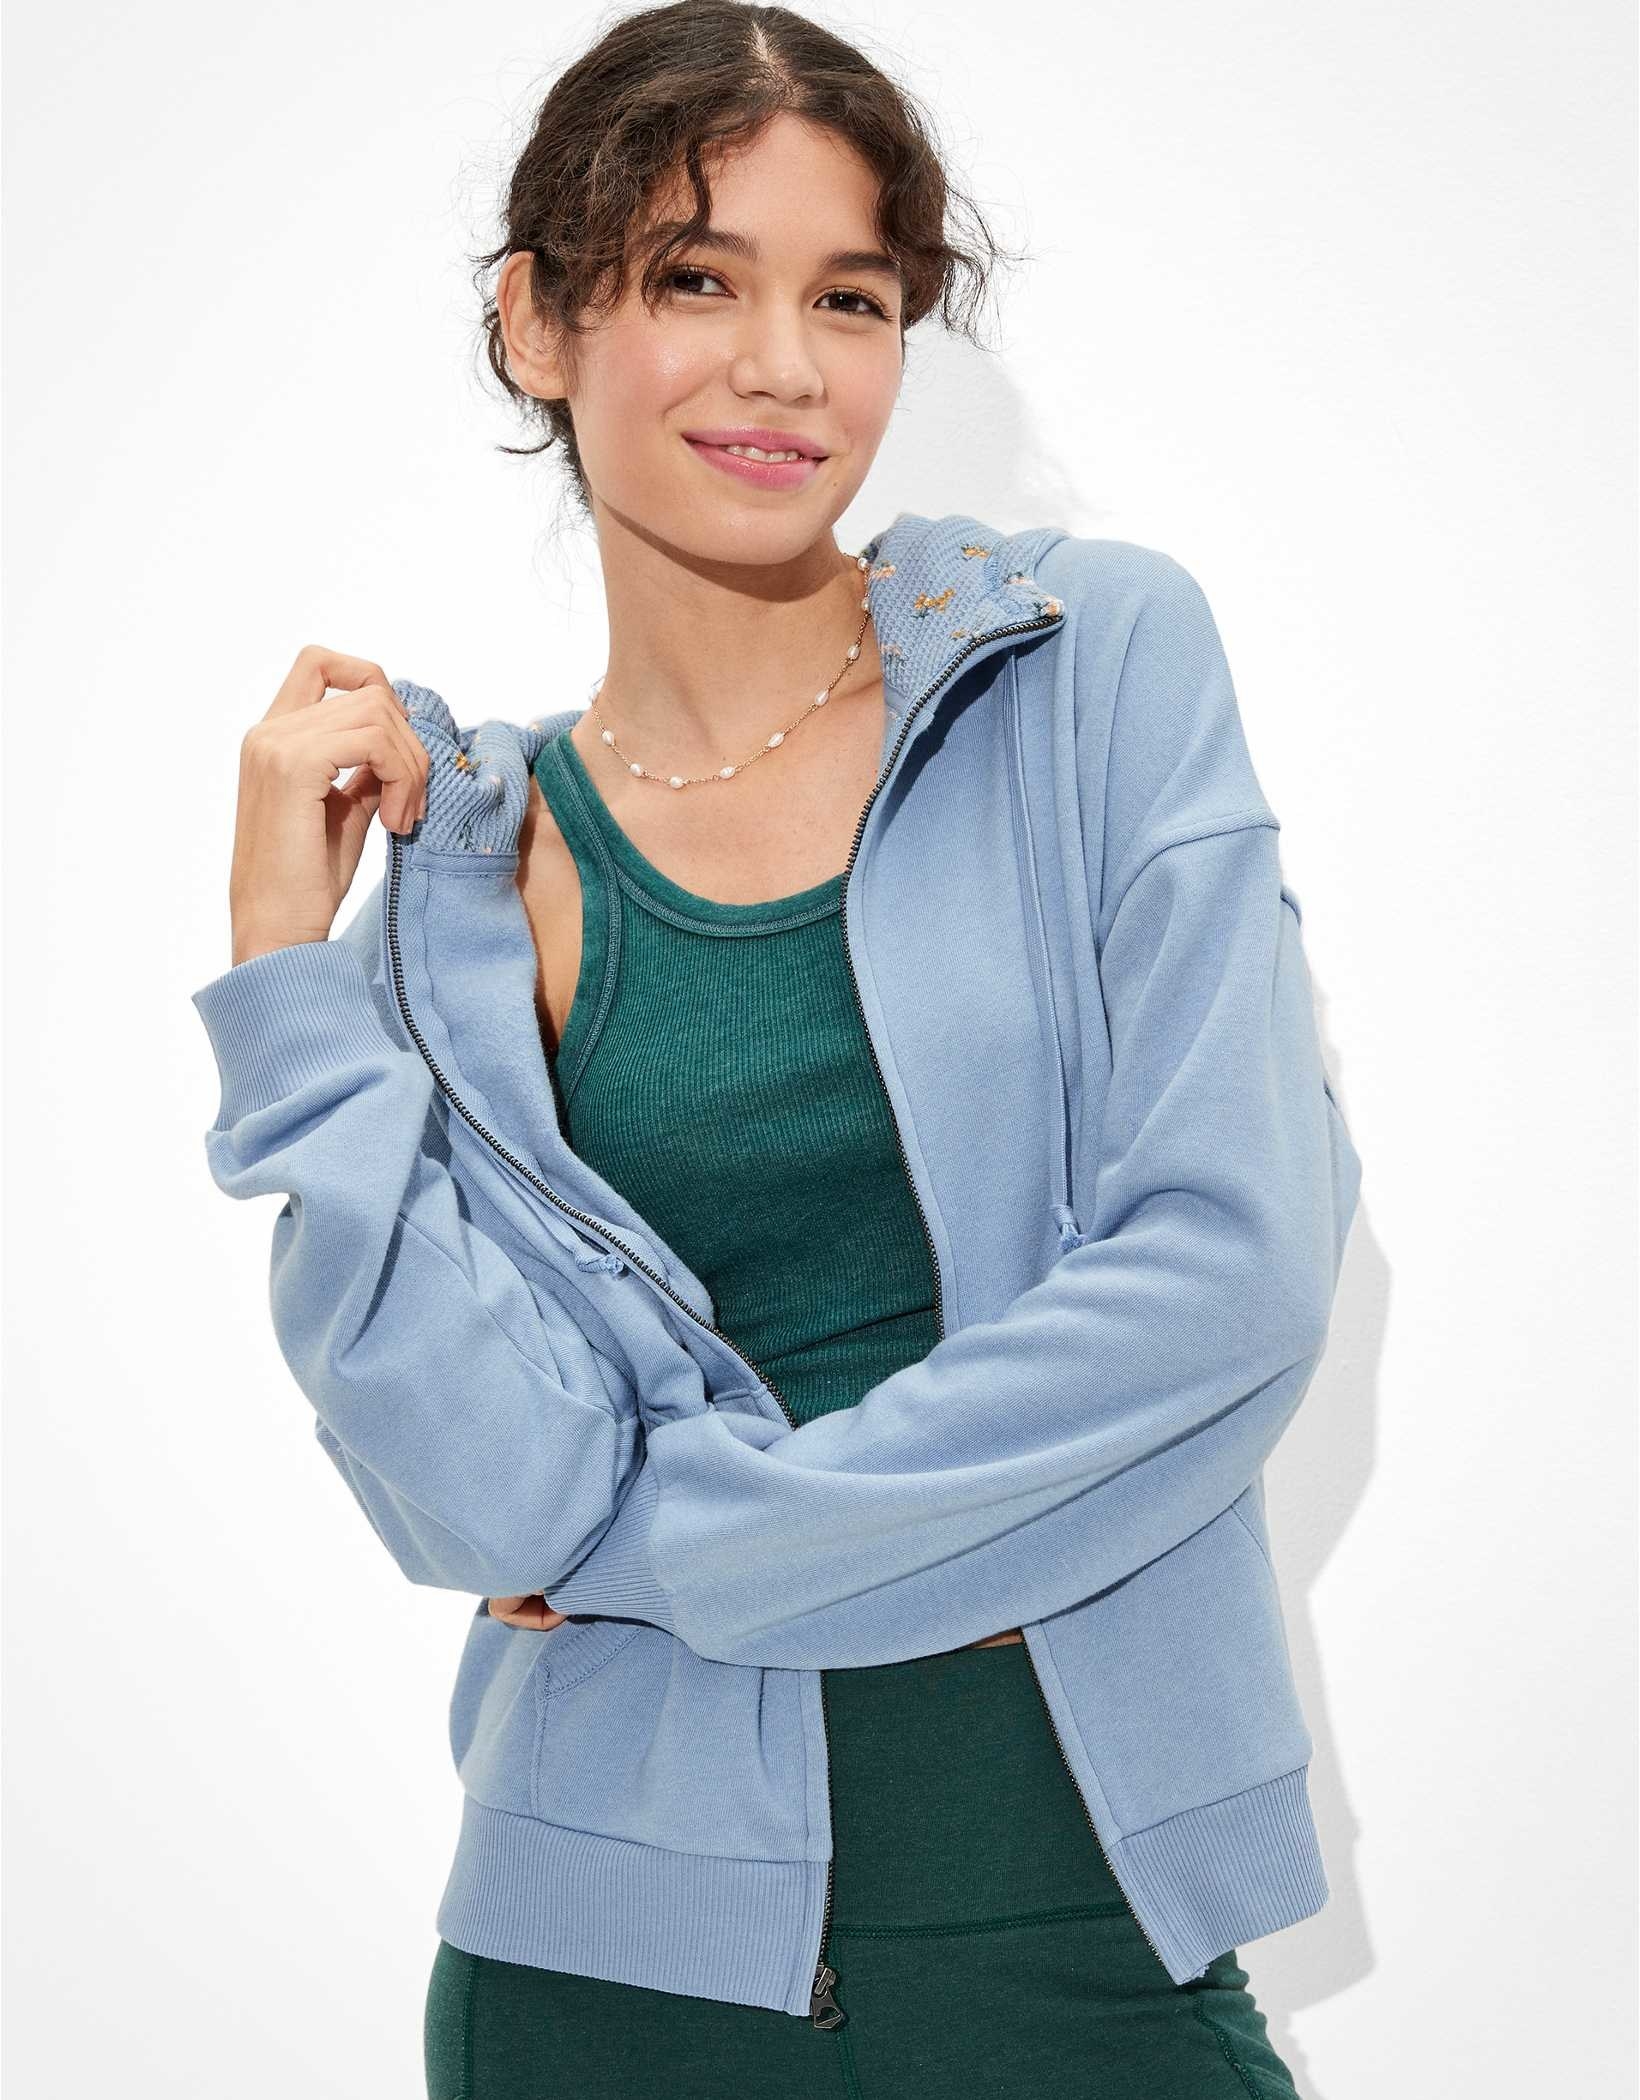 Model wearing the light blue zip-up over green tank with sweats